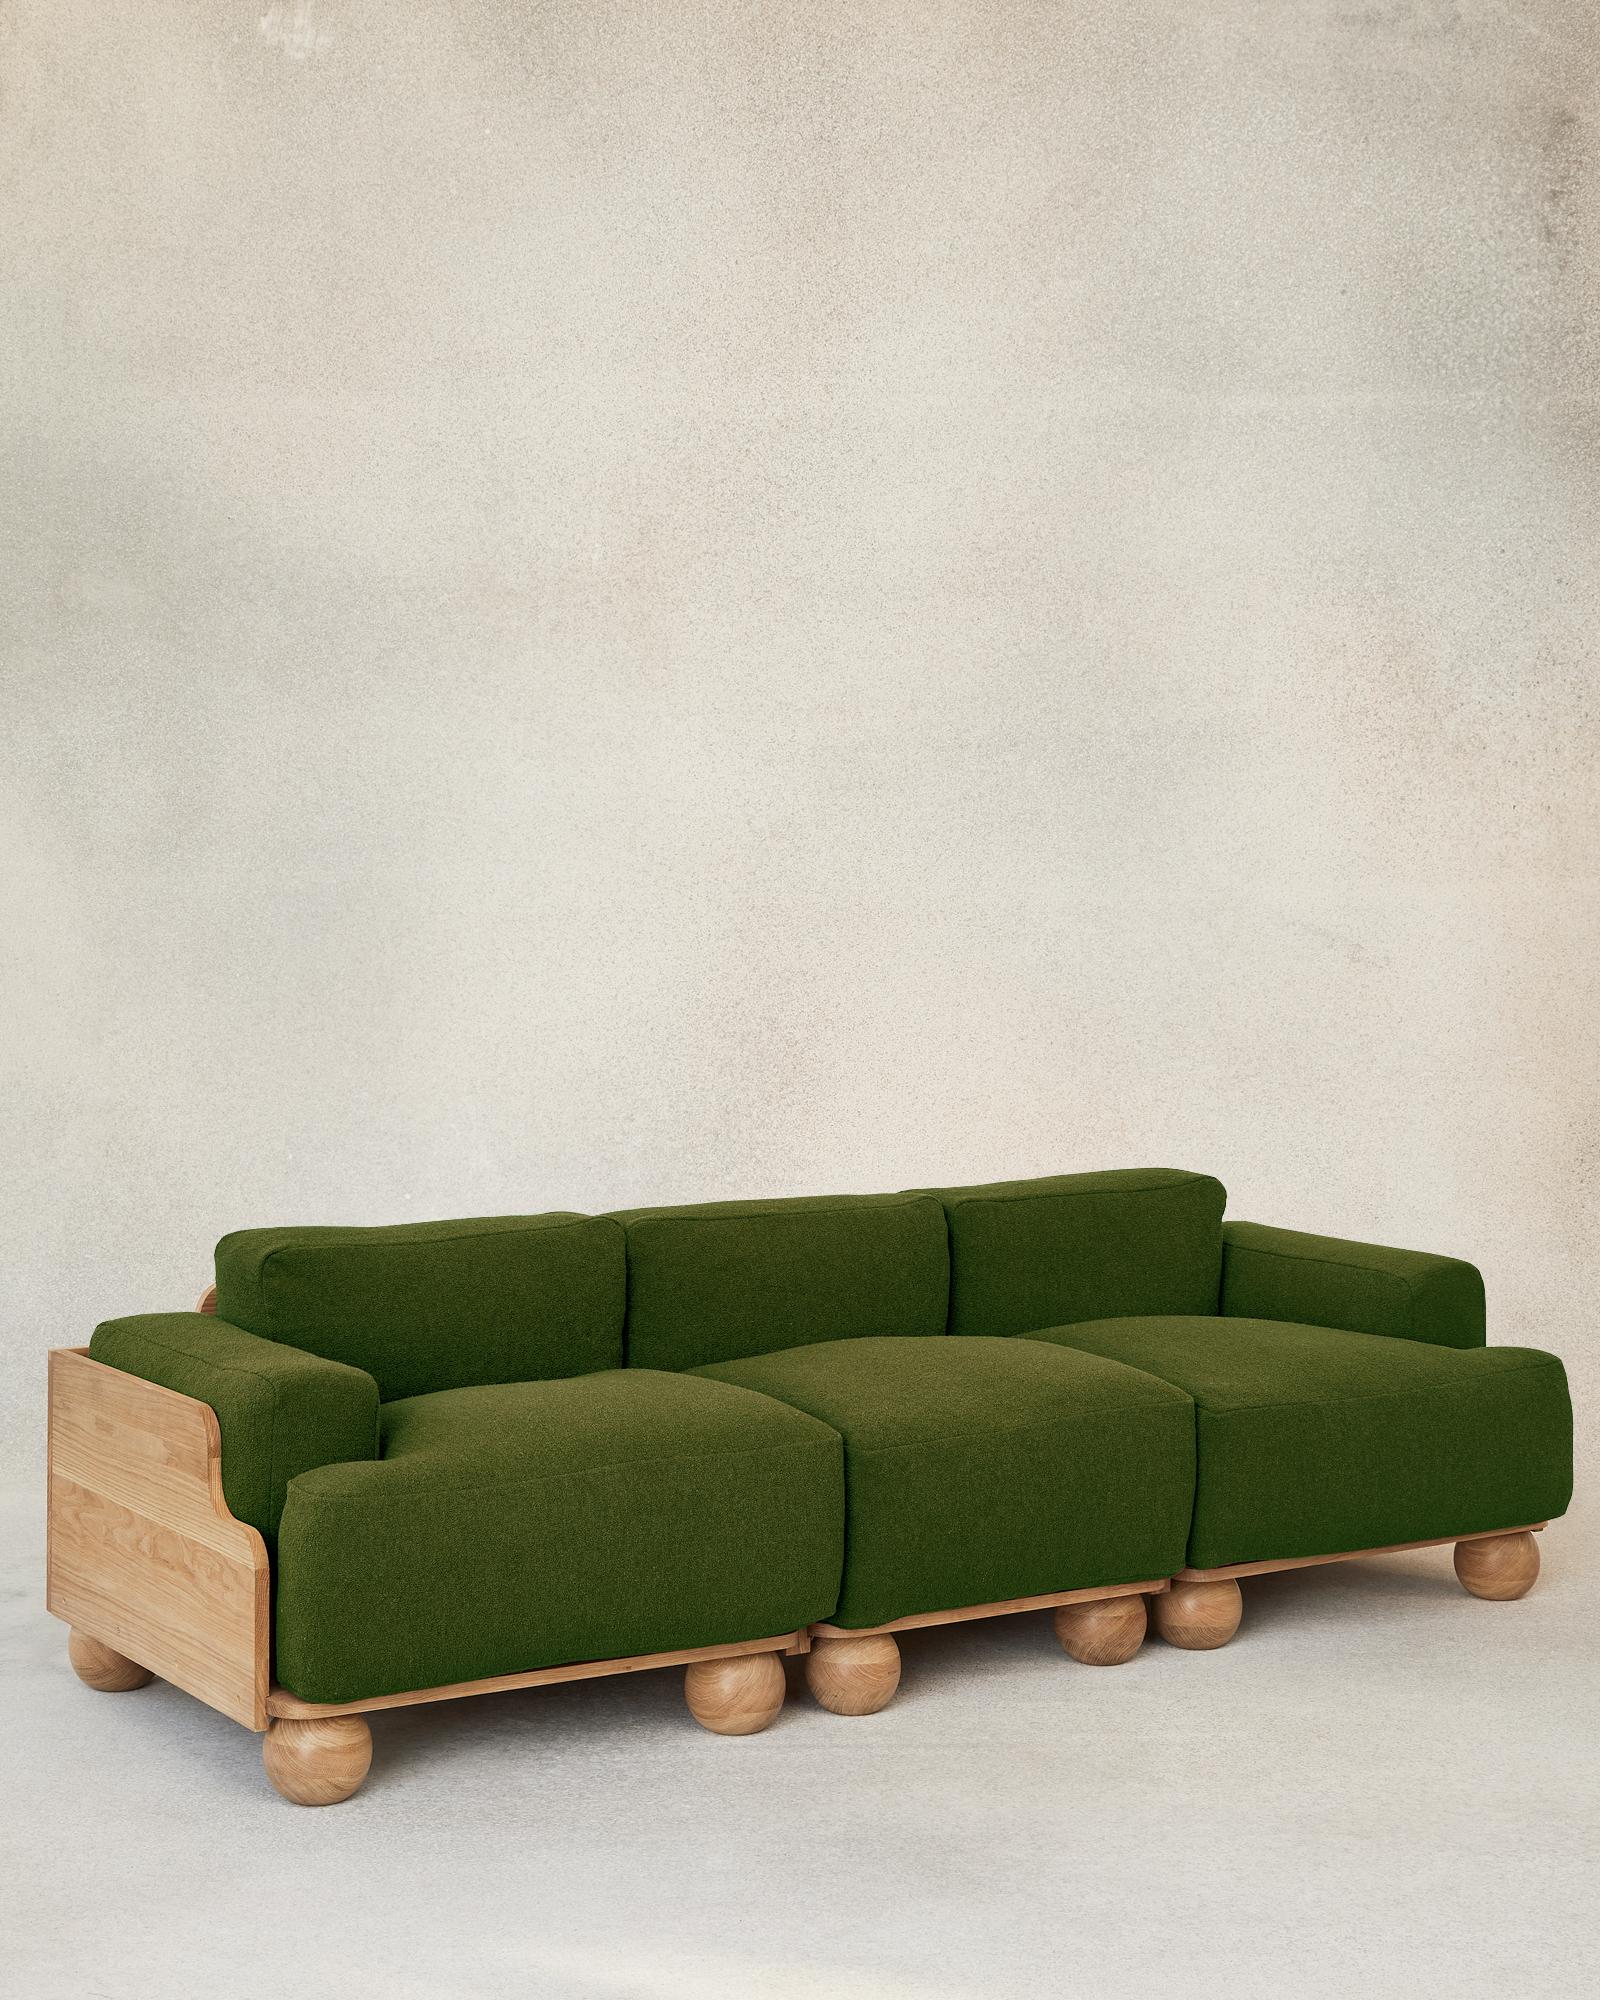 The Cove Sofas adapts to any interior environment and beckons to be sat in all day. The modular design allows versatile combinations and lengths of two-, three- or more seaters with or without arms. 

Expanses of sculptural solid oak encase the